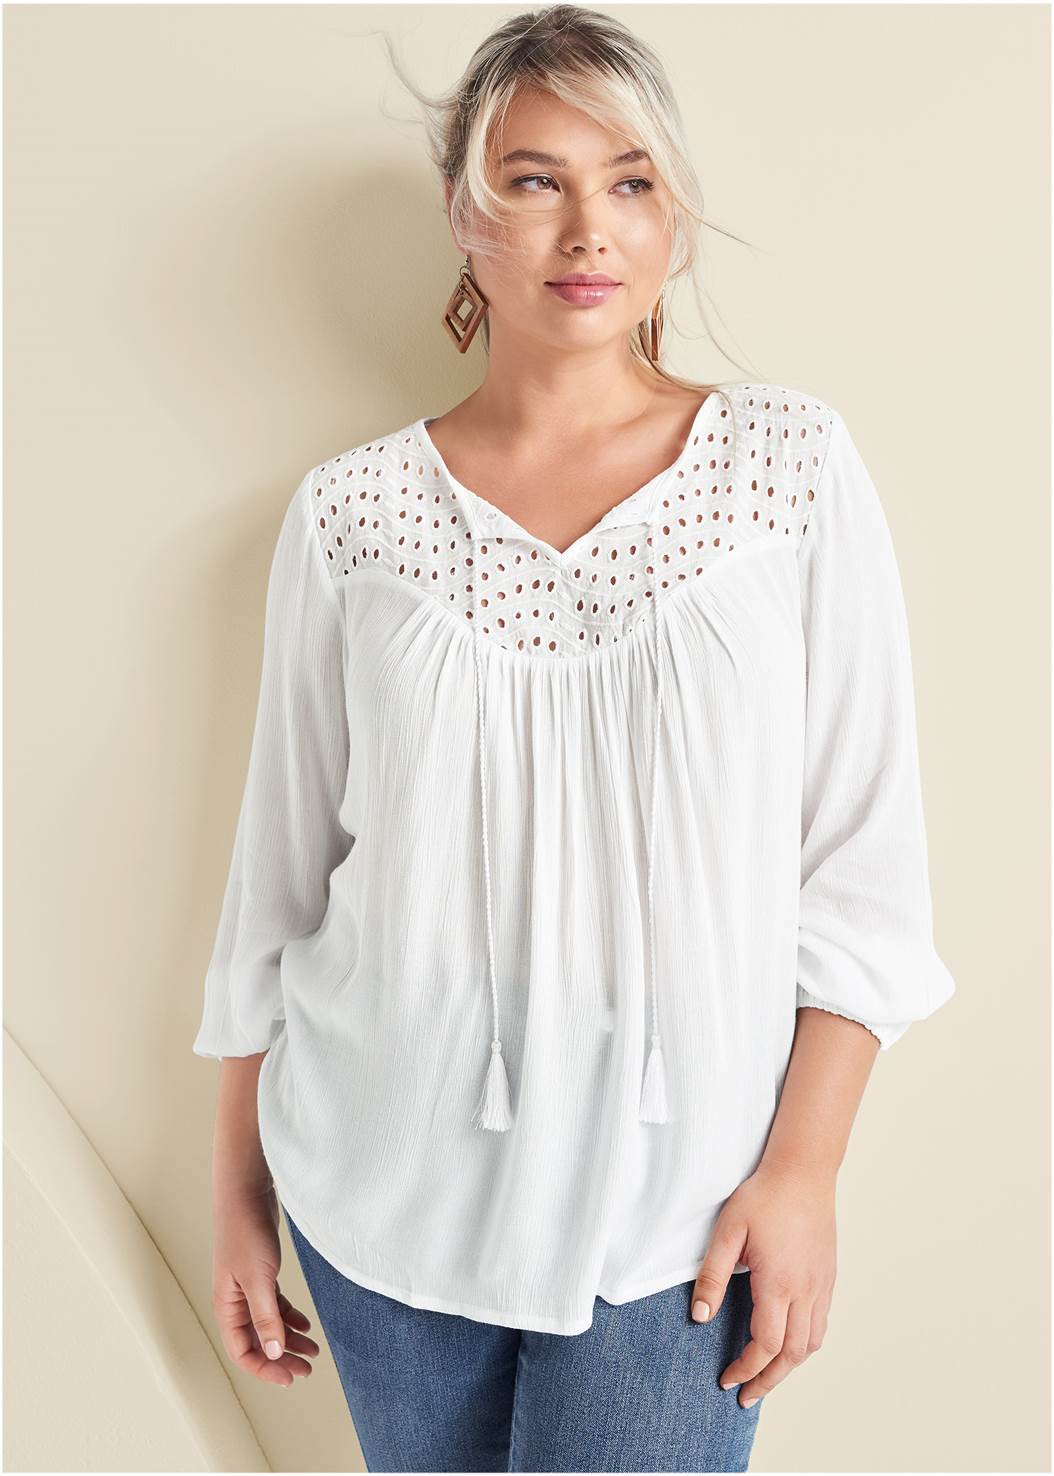 OVERSIZE TIE-FRONT BLOUSE in White | VENUS